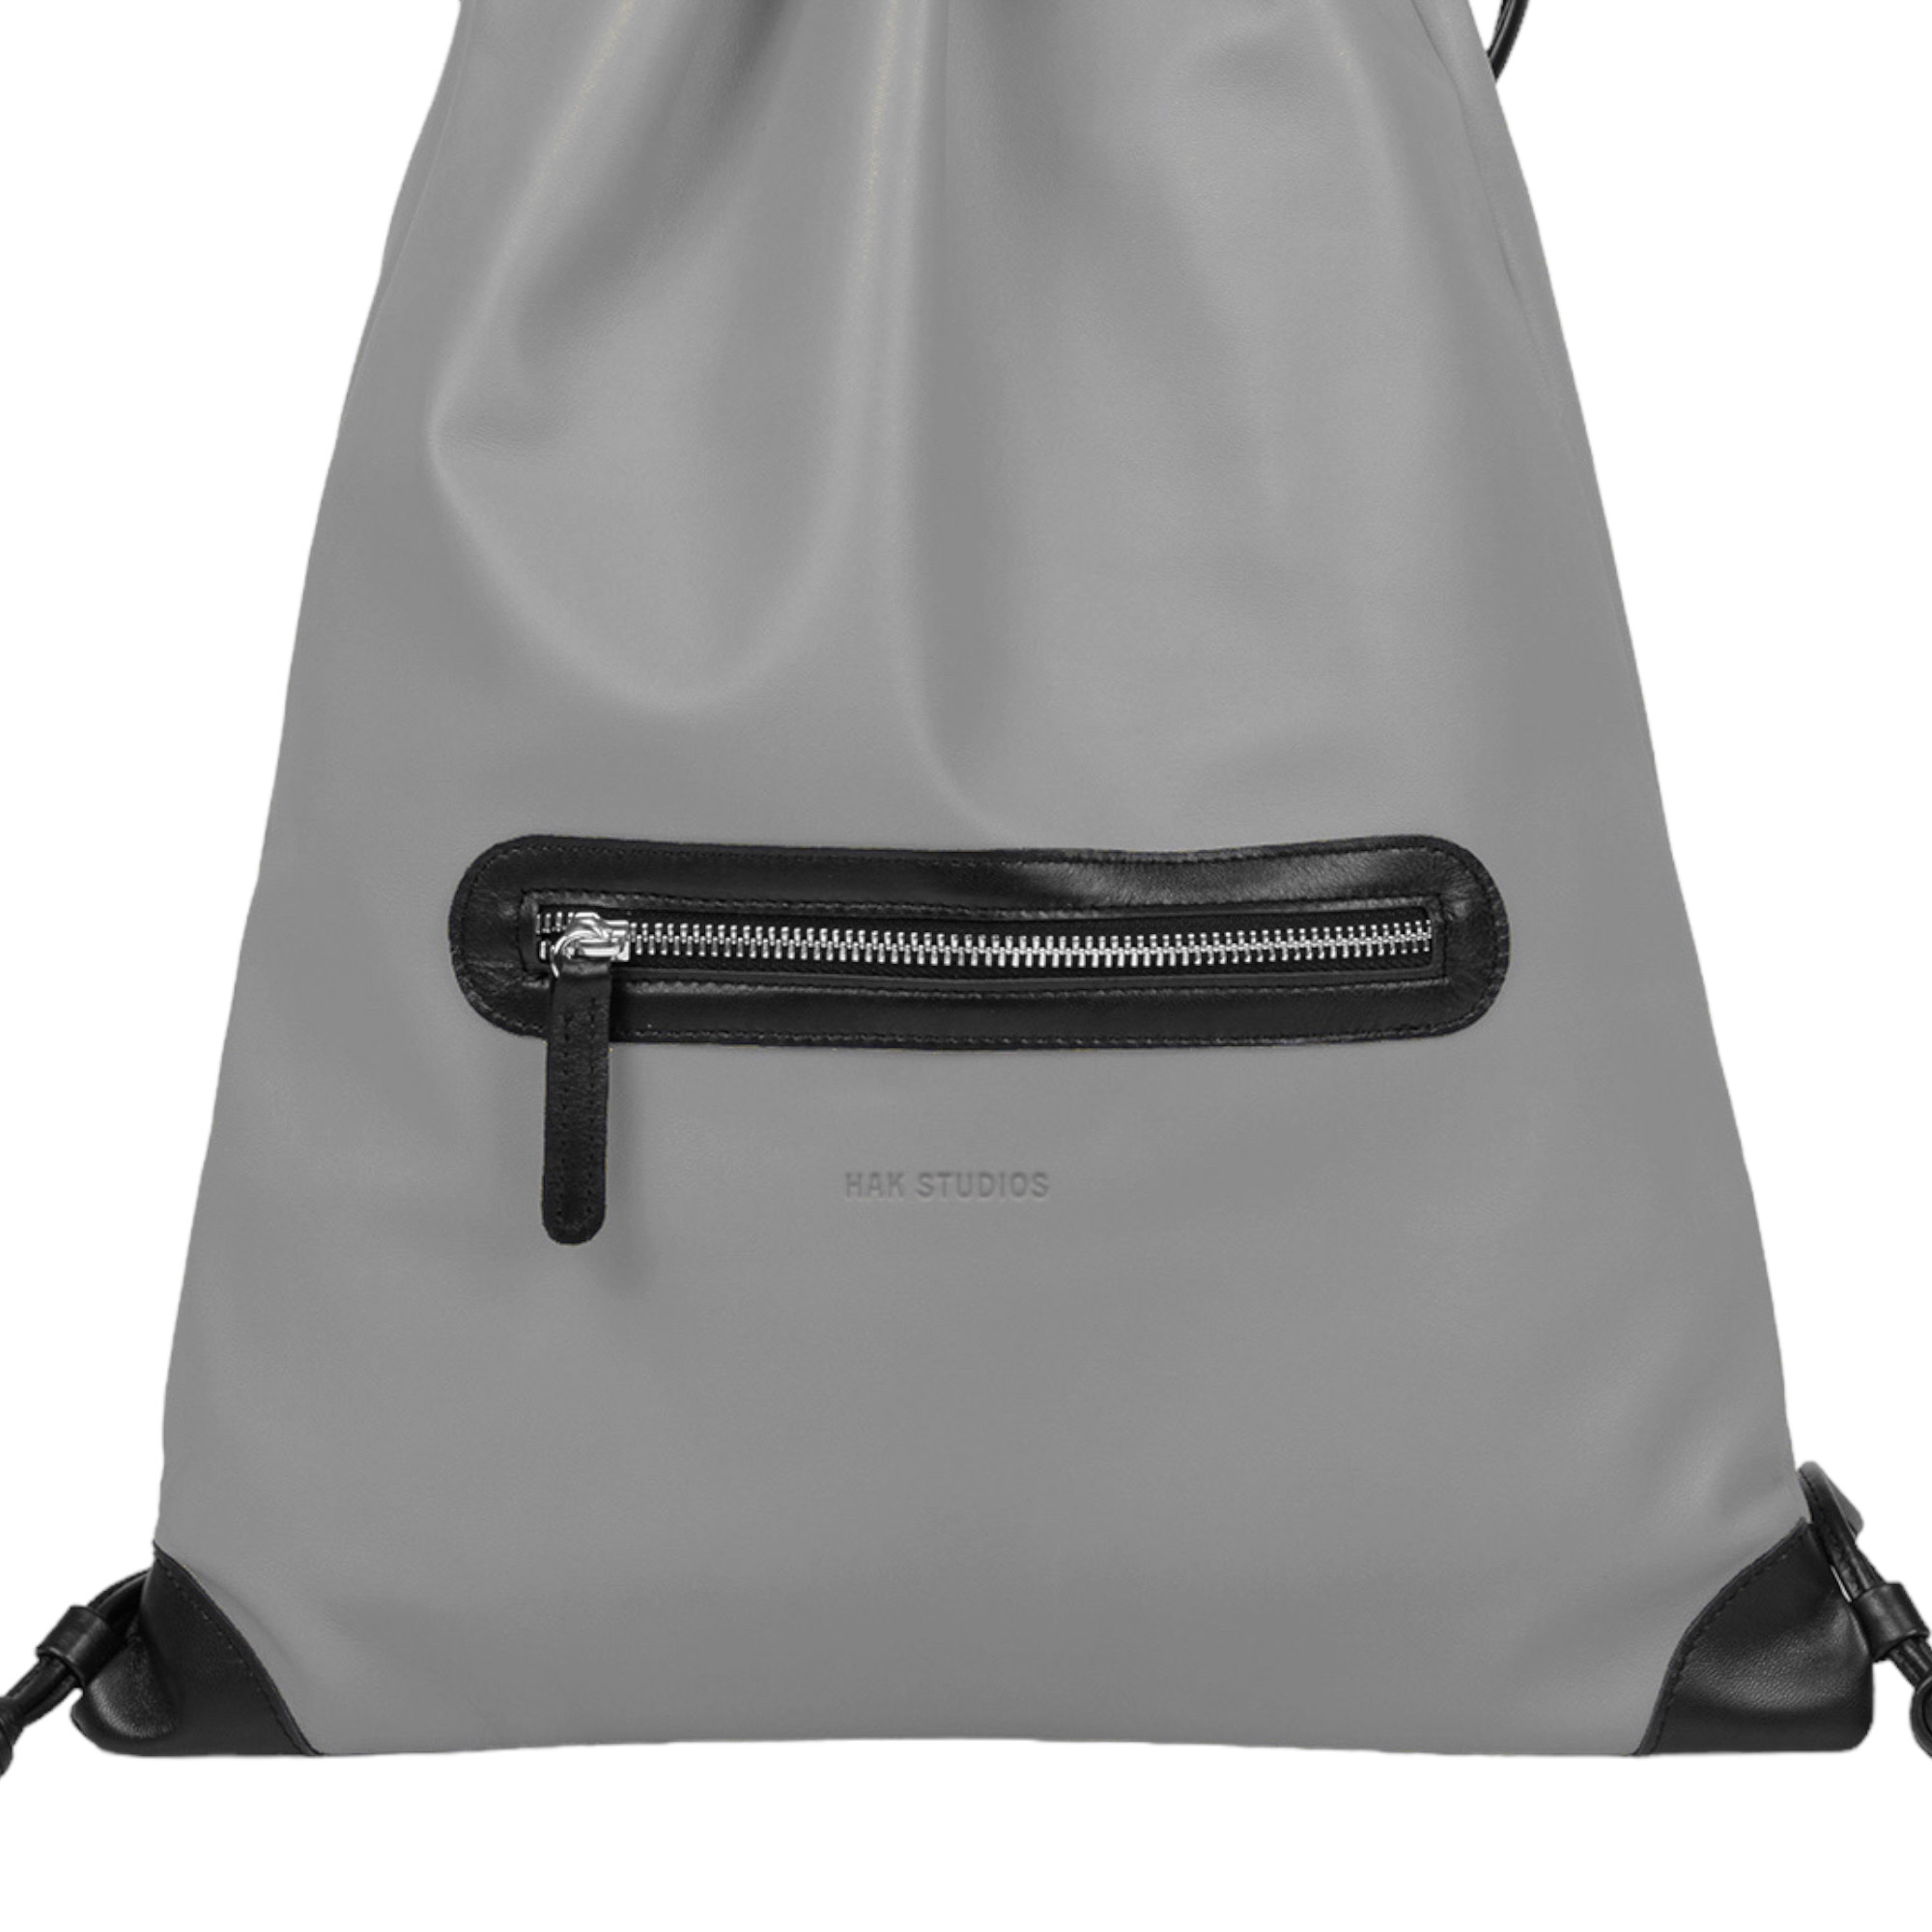 Leather backpack in gray color